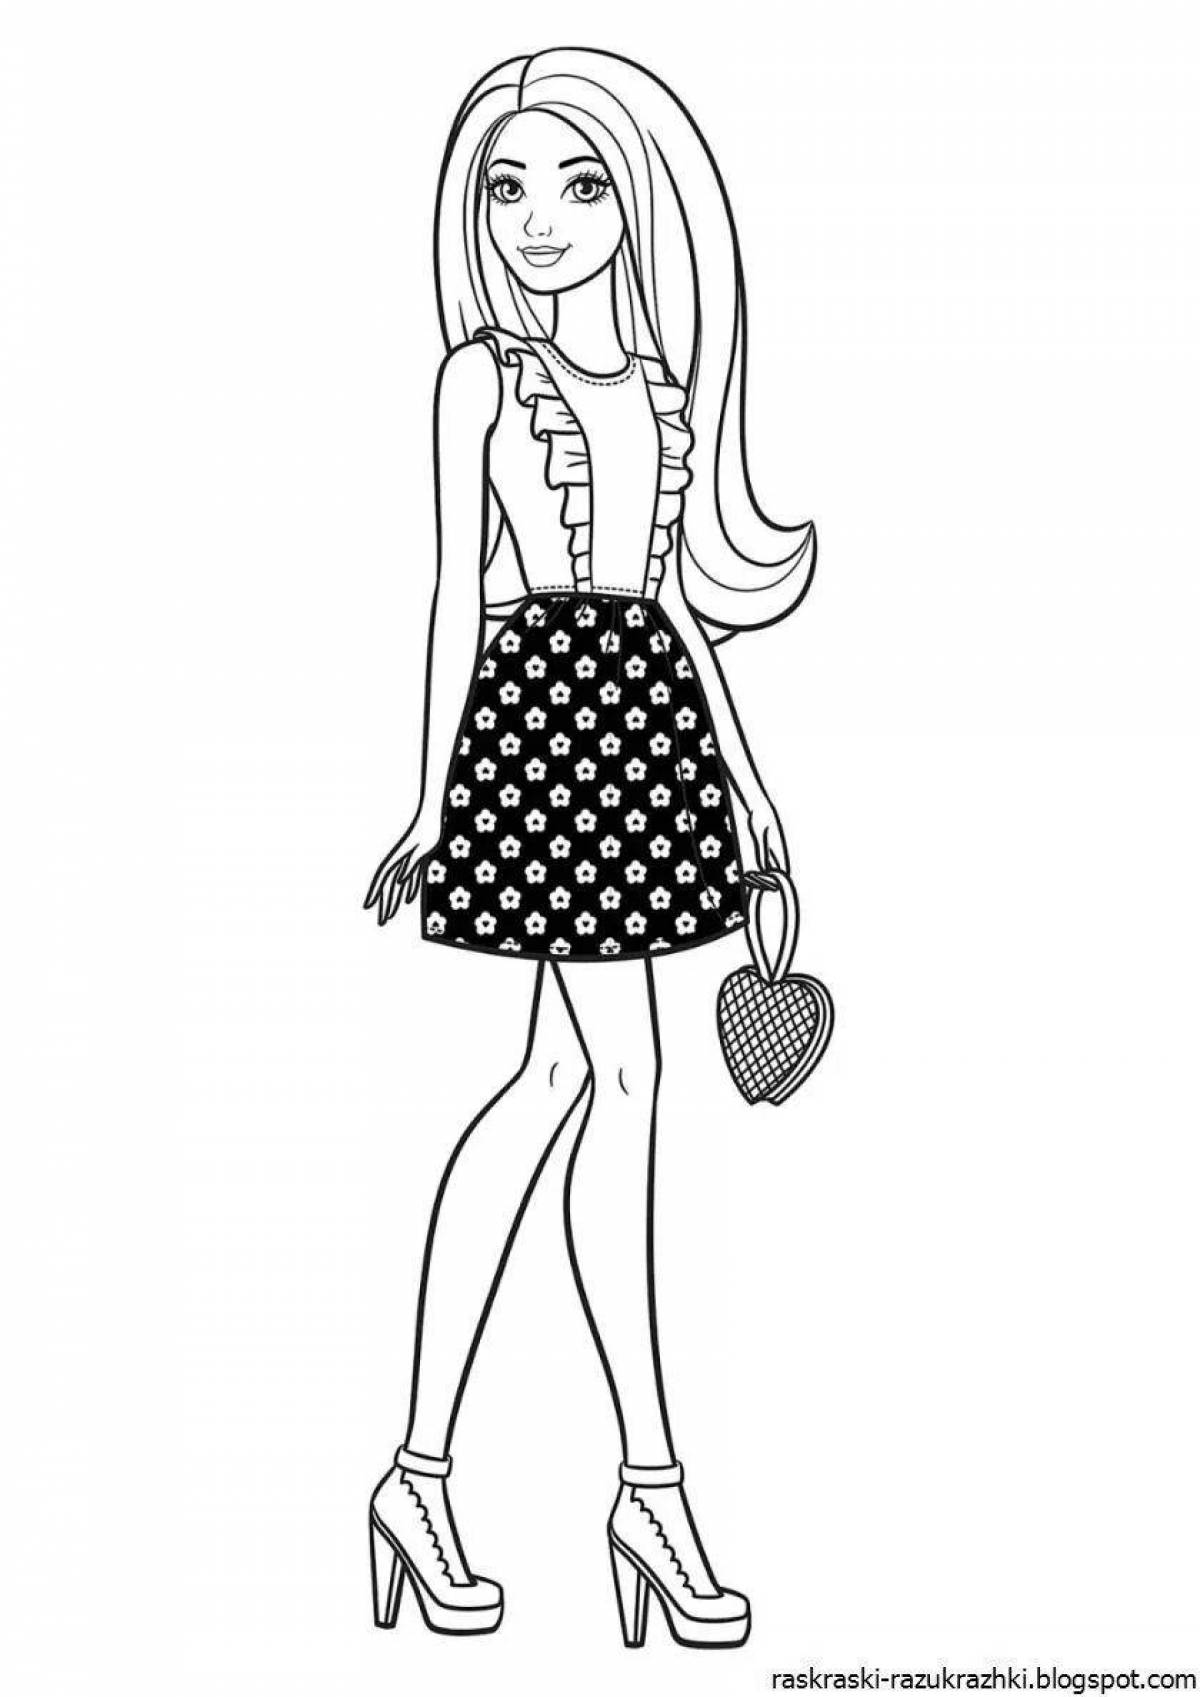 Coloring pages stylish girls - bright